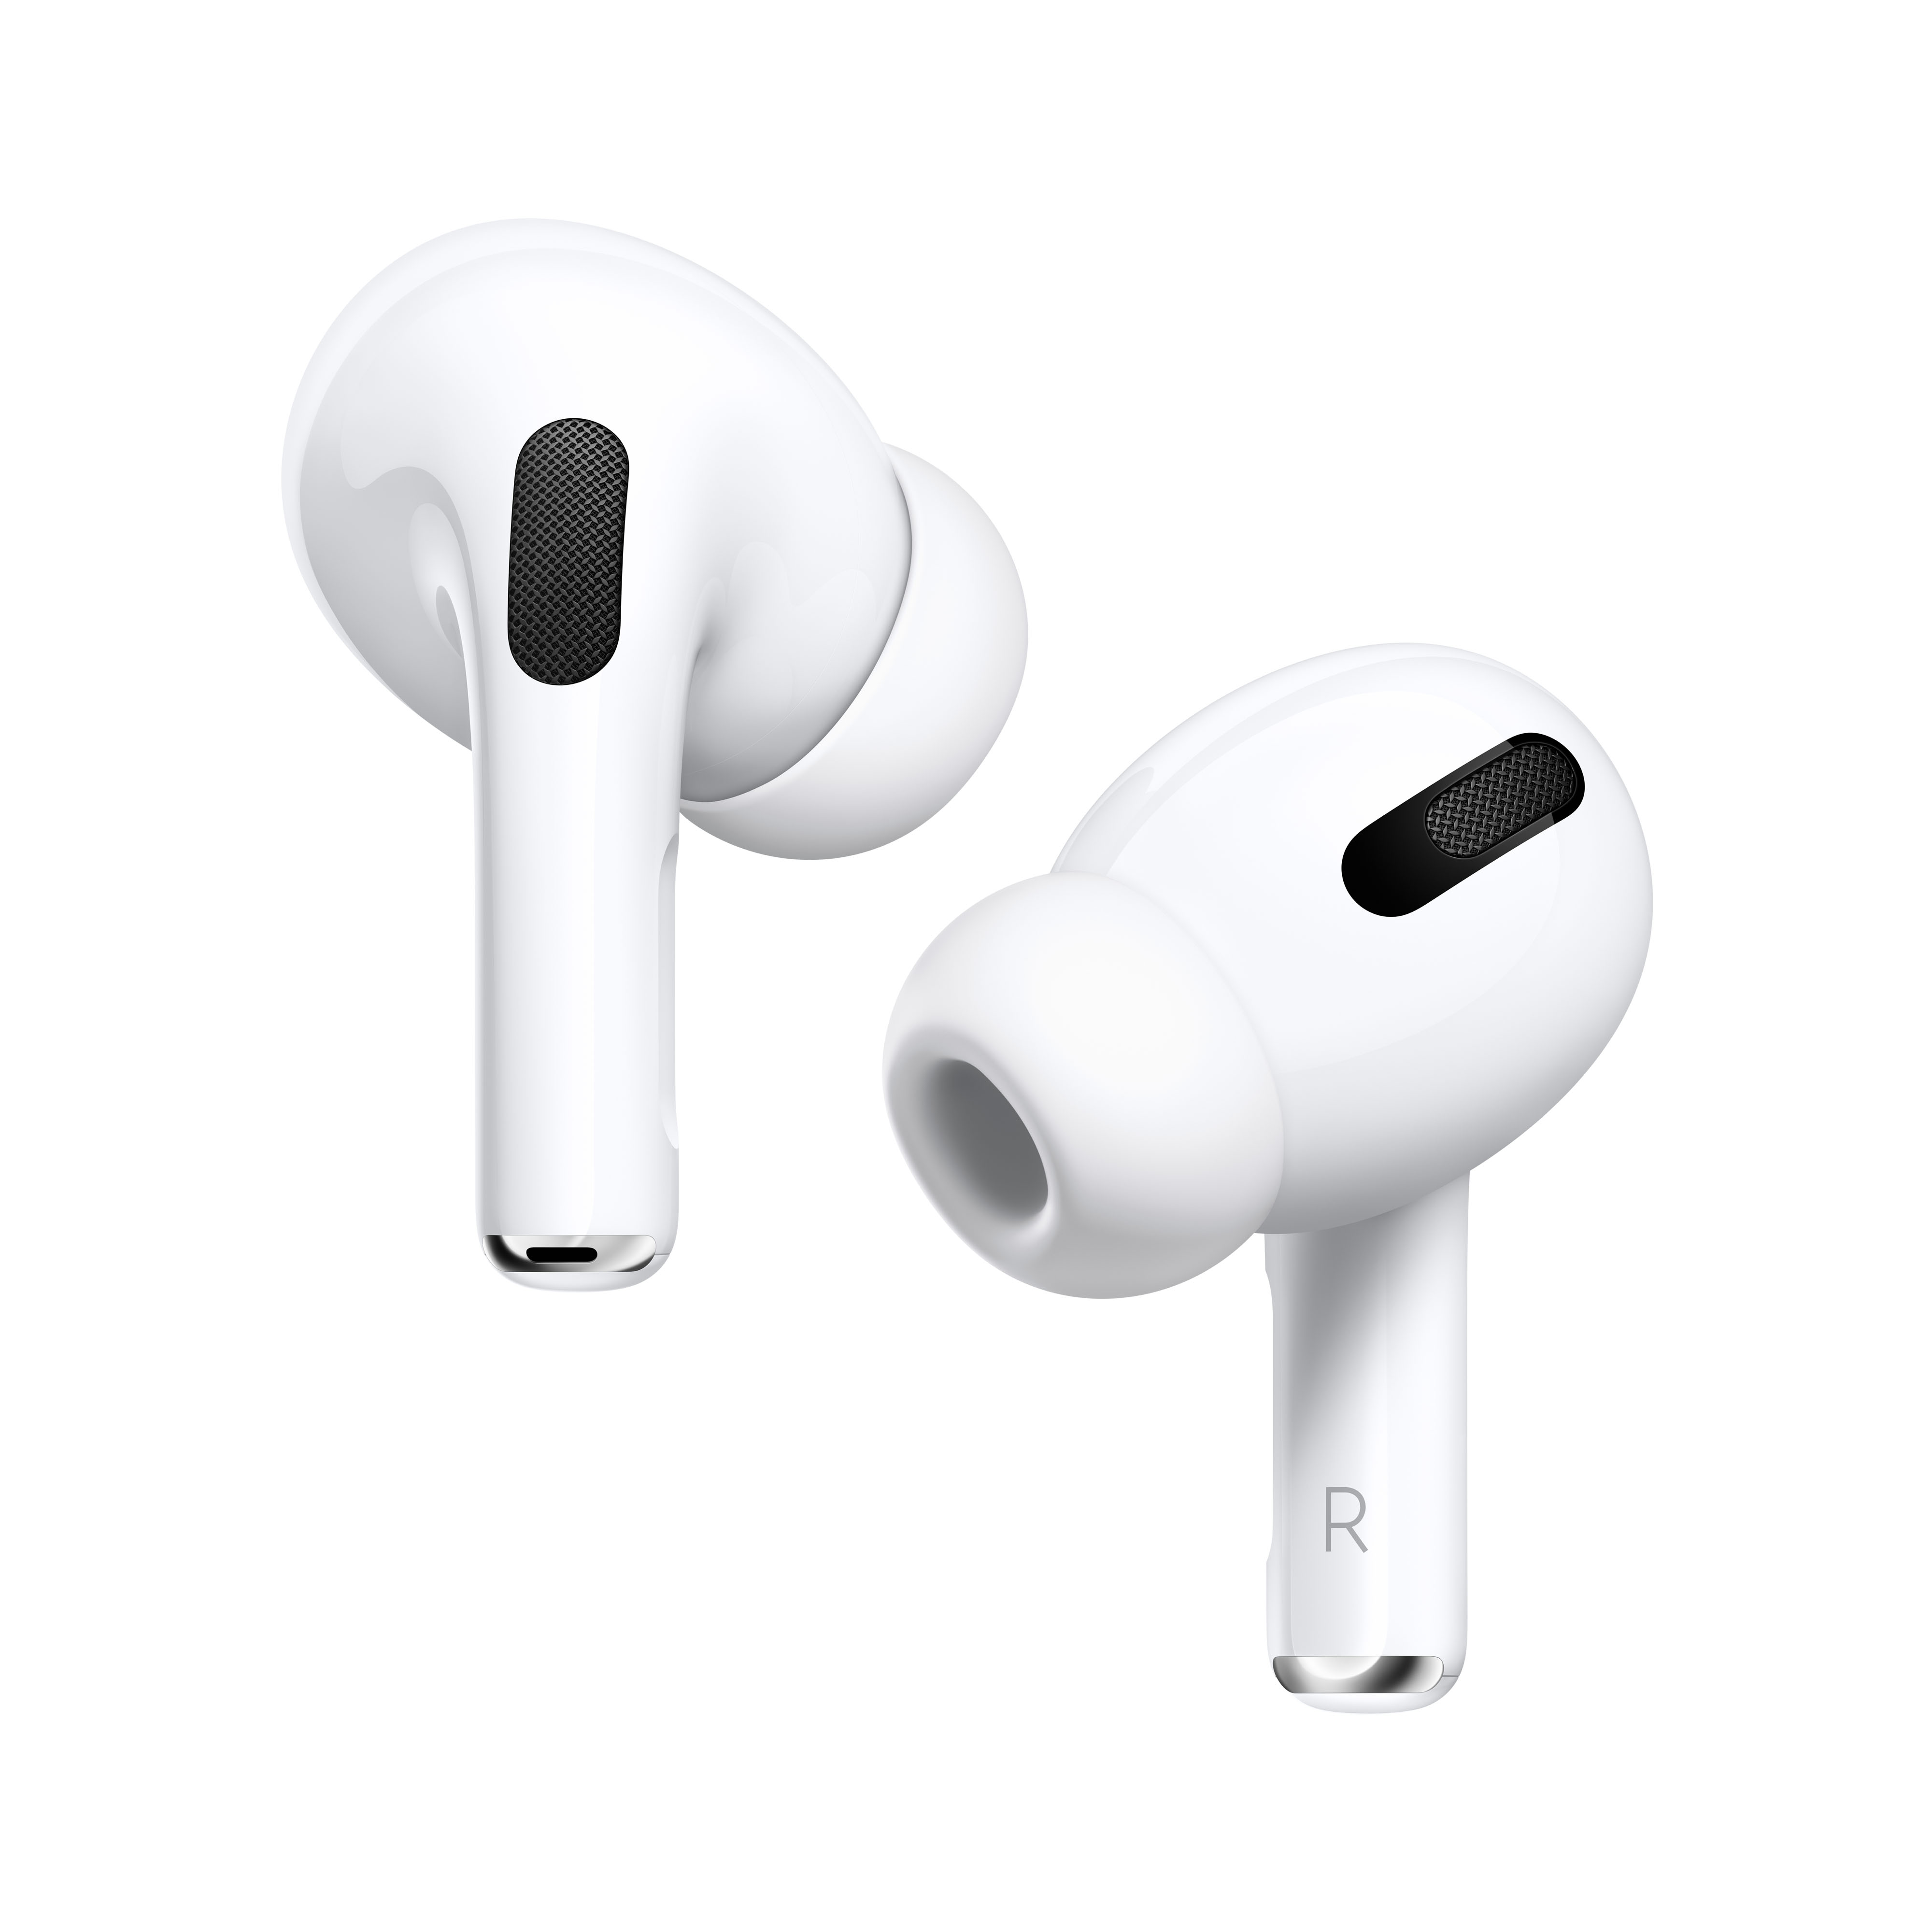 Apple Airpods Pro - New $179.99